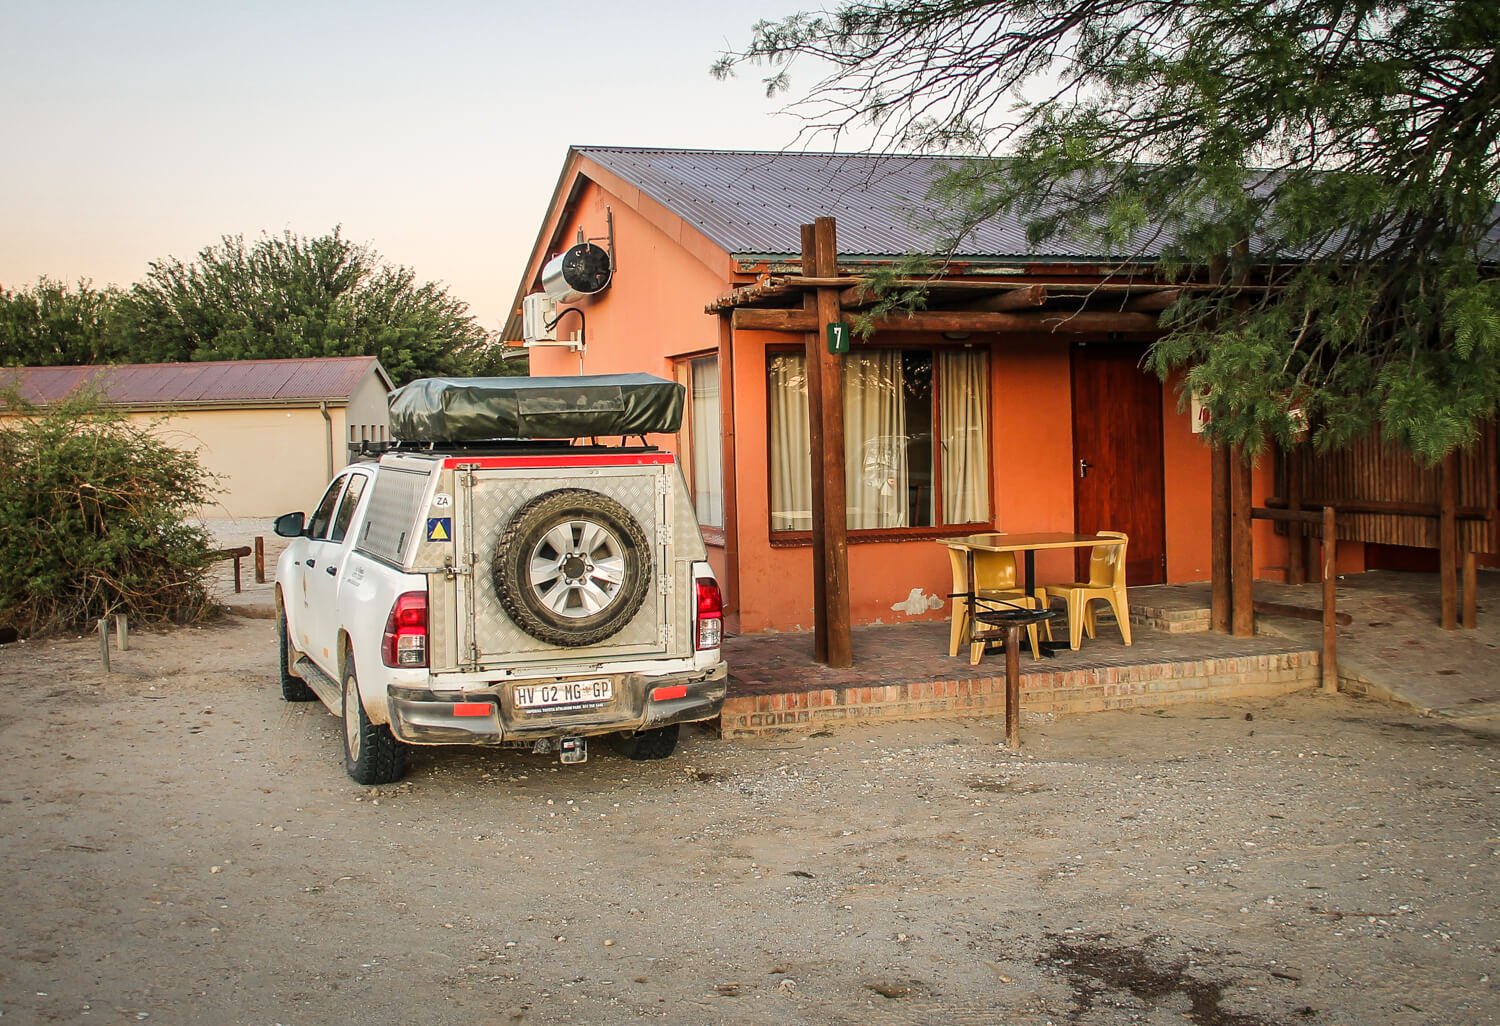 Kgalagadi Transfrontier Park Accommodation An Overview Of All Campsites And Wilderness Camps